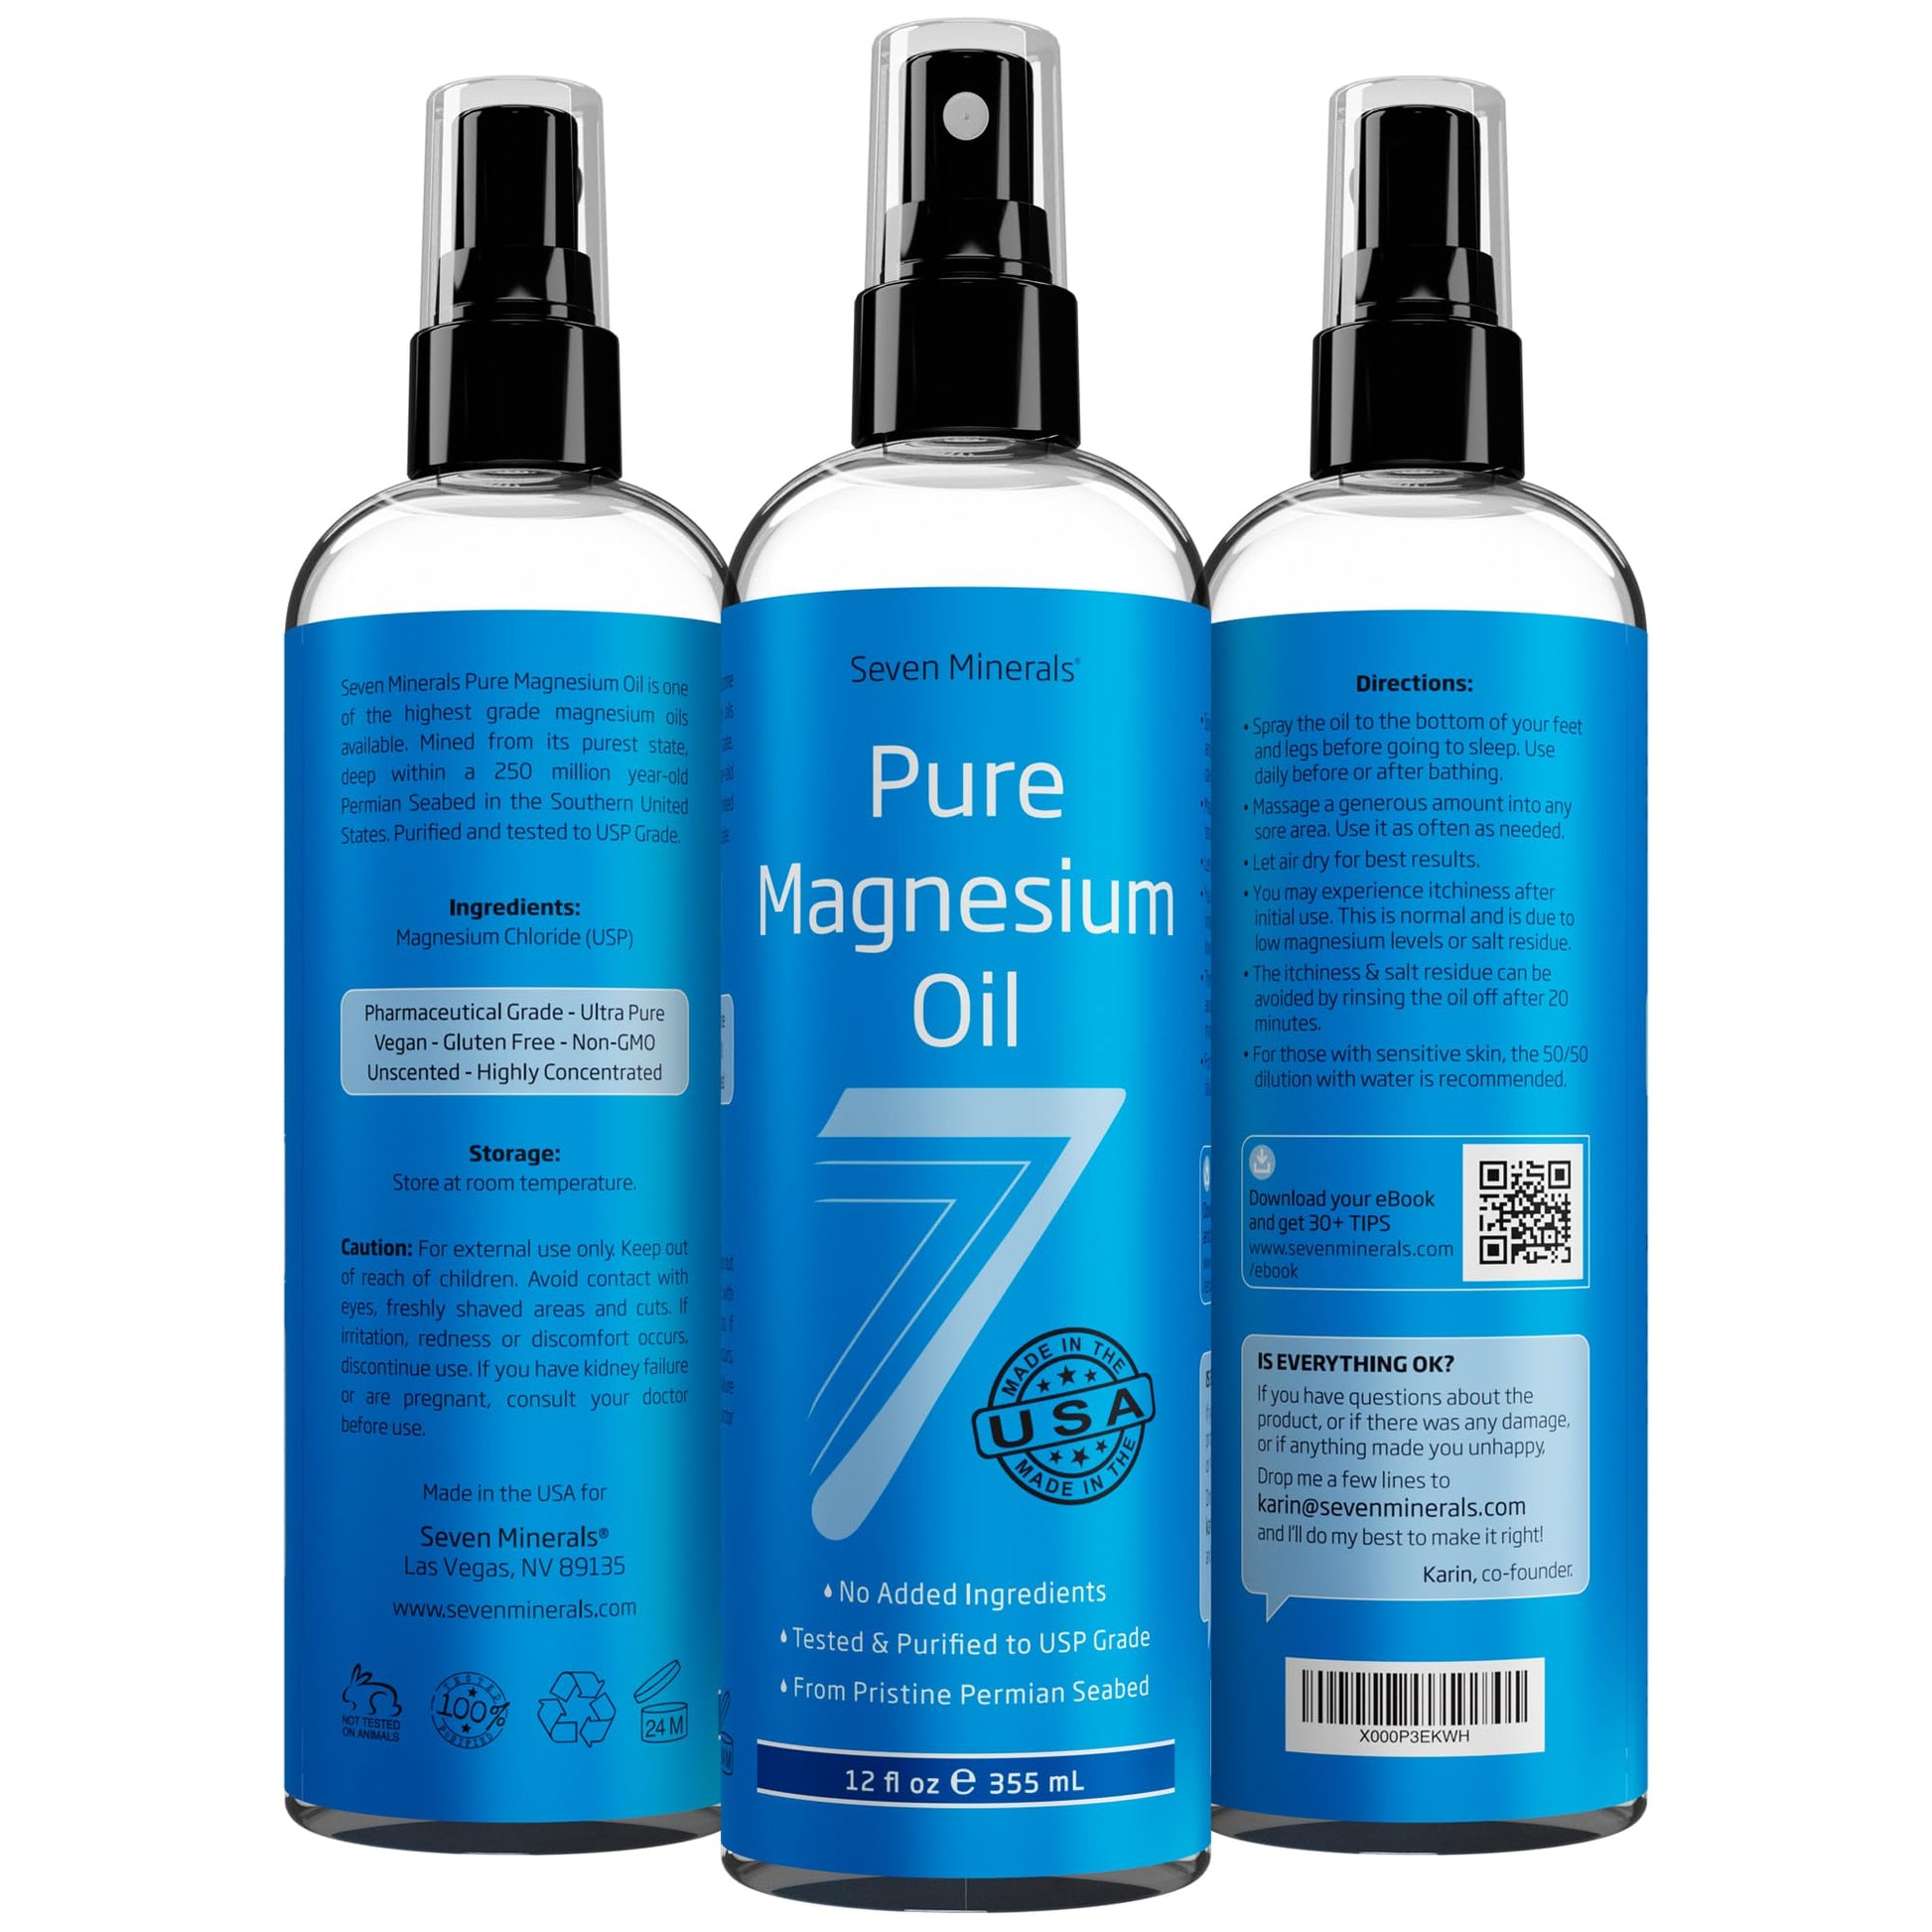 Seven Minerals Pure Magnesium Oil Spray (12 fl oz) - Long-Lasting Relief &amp; Relaxation - USP Grade, No Harsh Minerals - Ancient Zechstein Seabed Source (USA) - Free eBook Included.